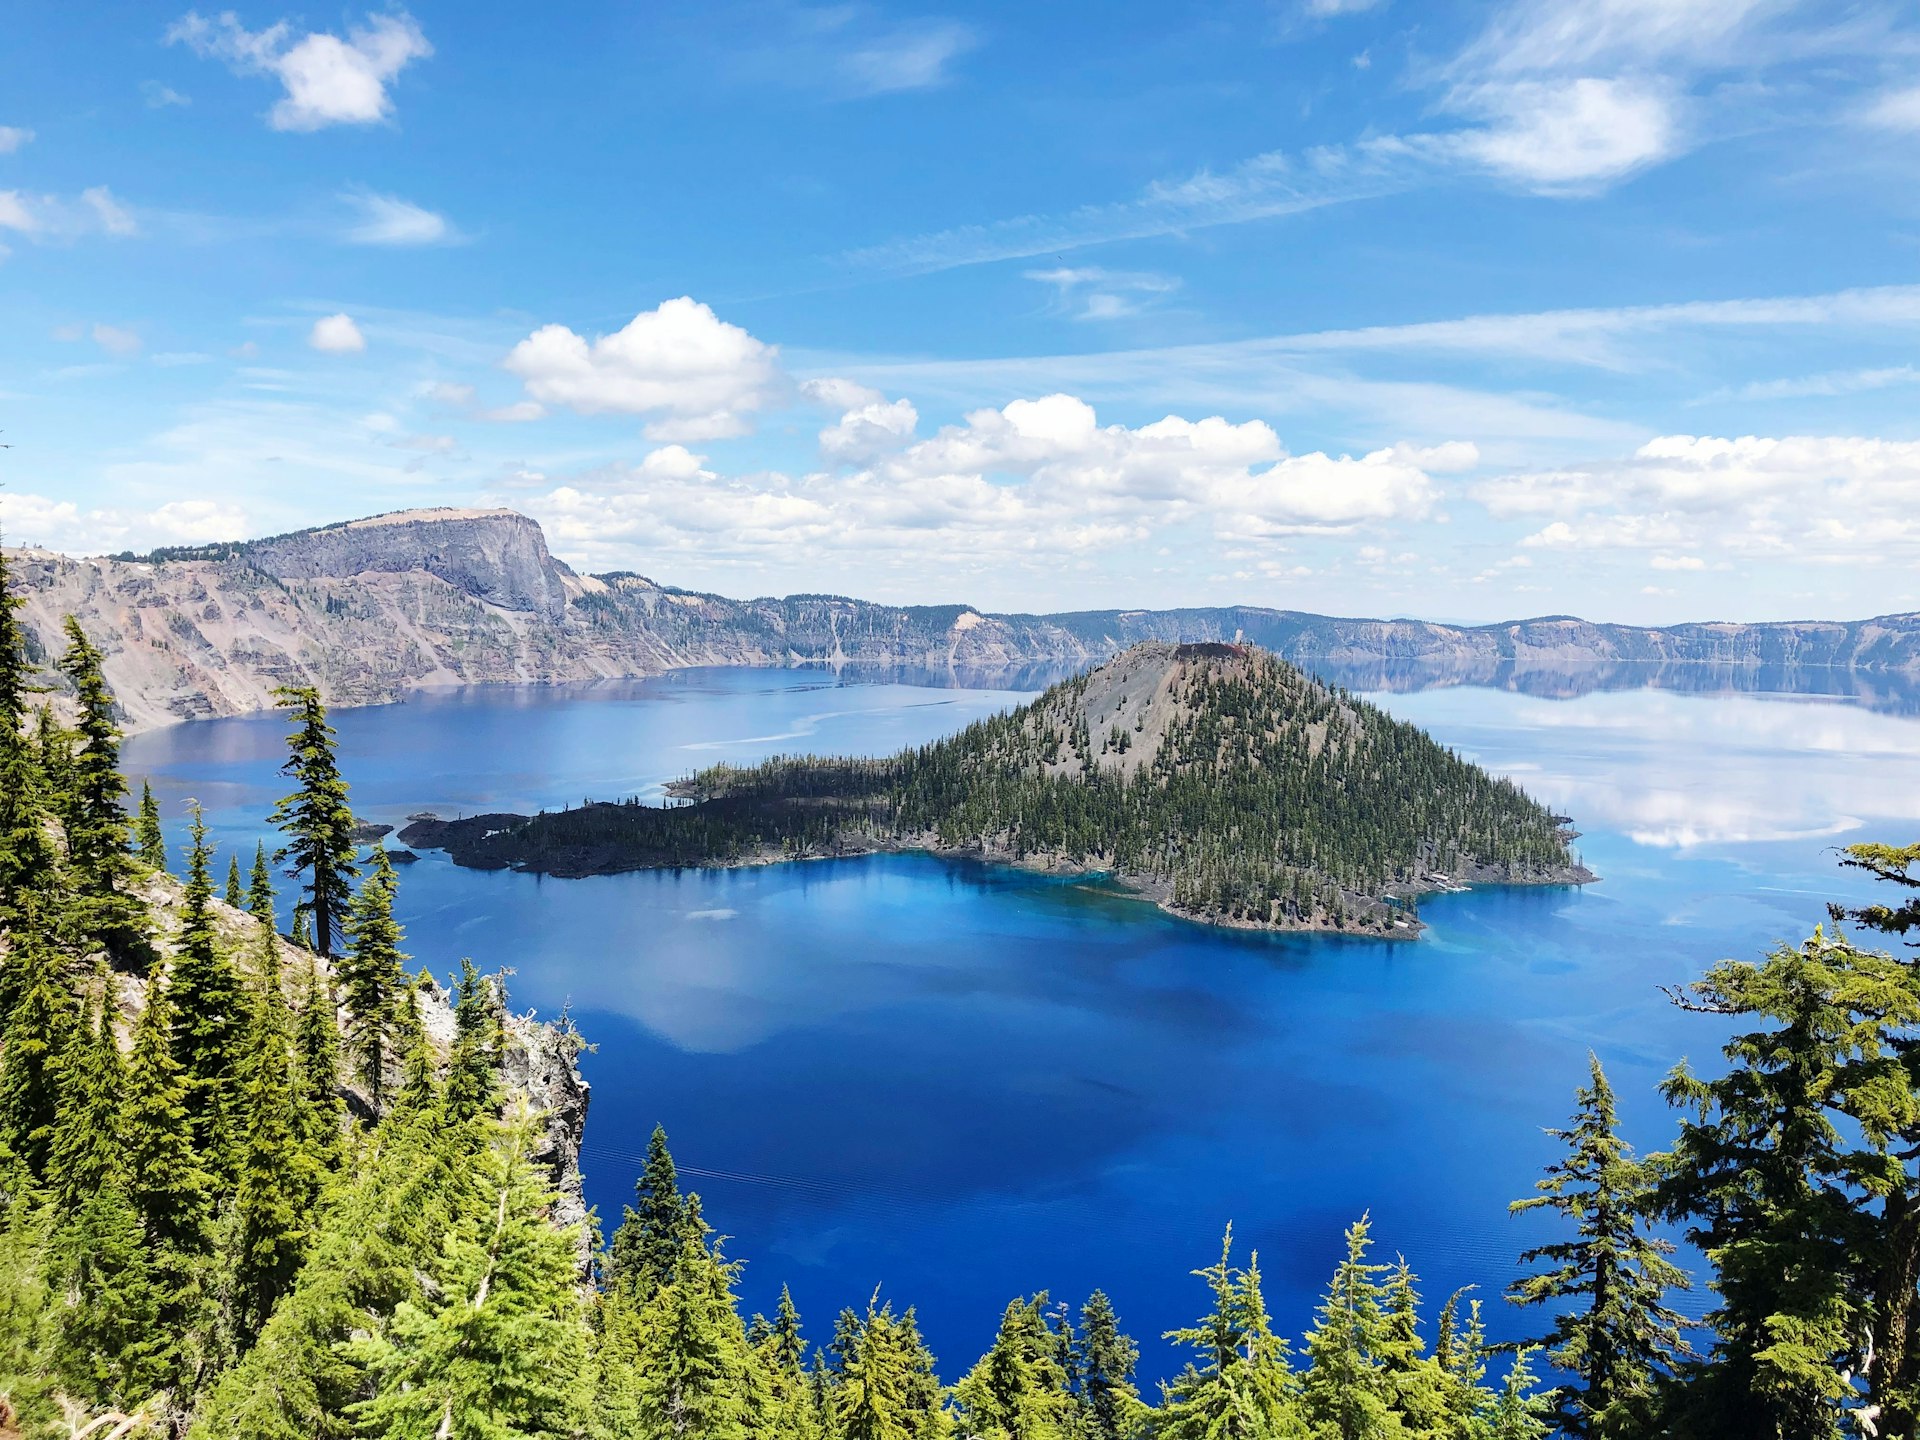 Wizard Island in Crater Lake National Park